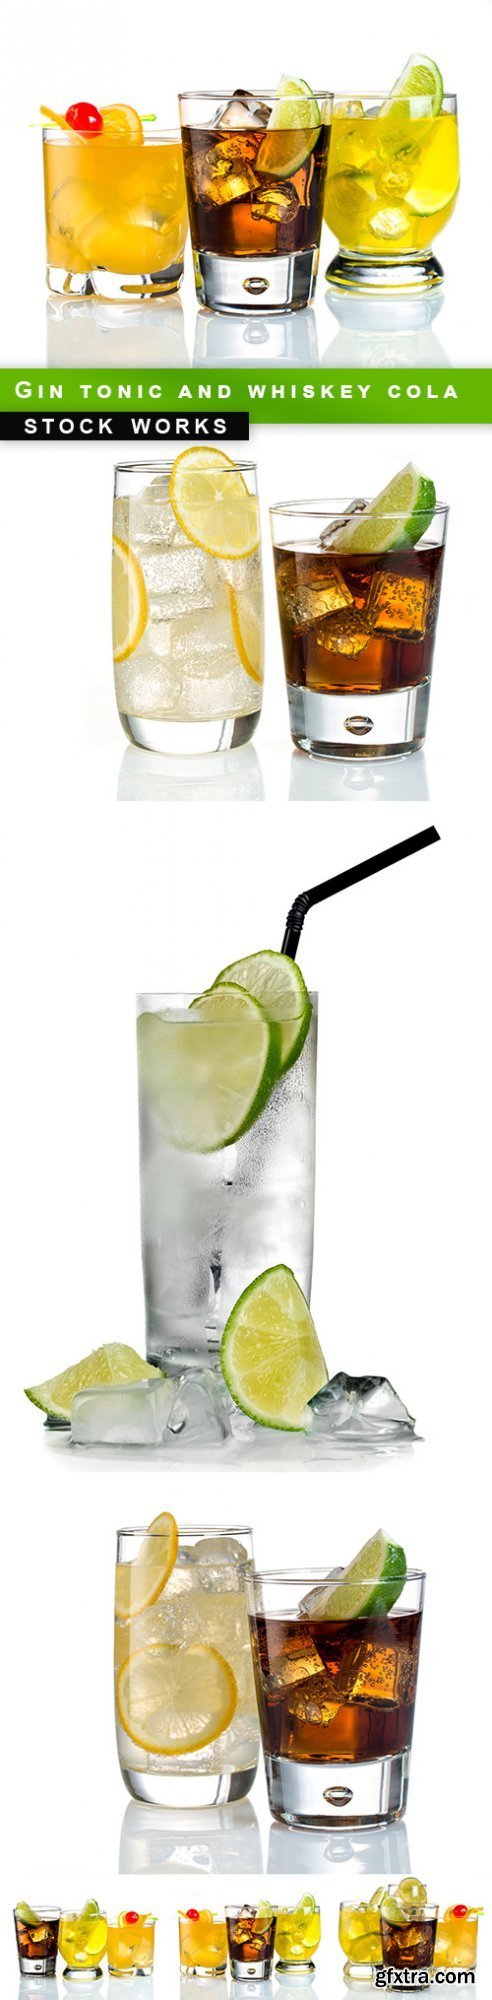 Gin tonic and whiskey cola